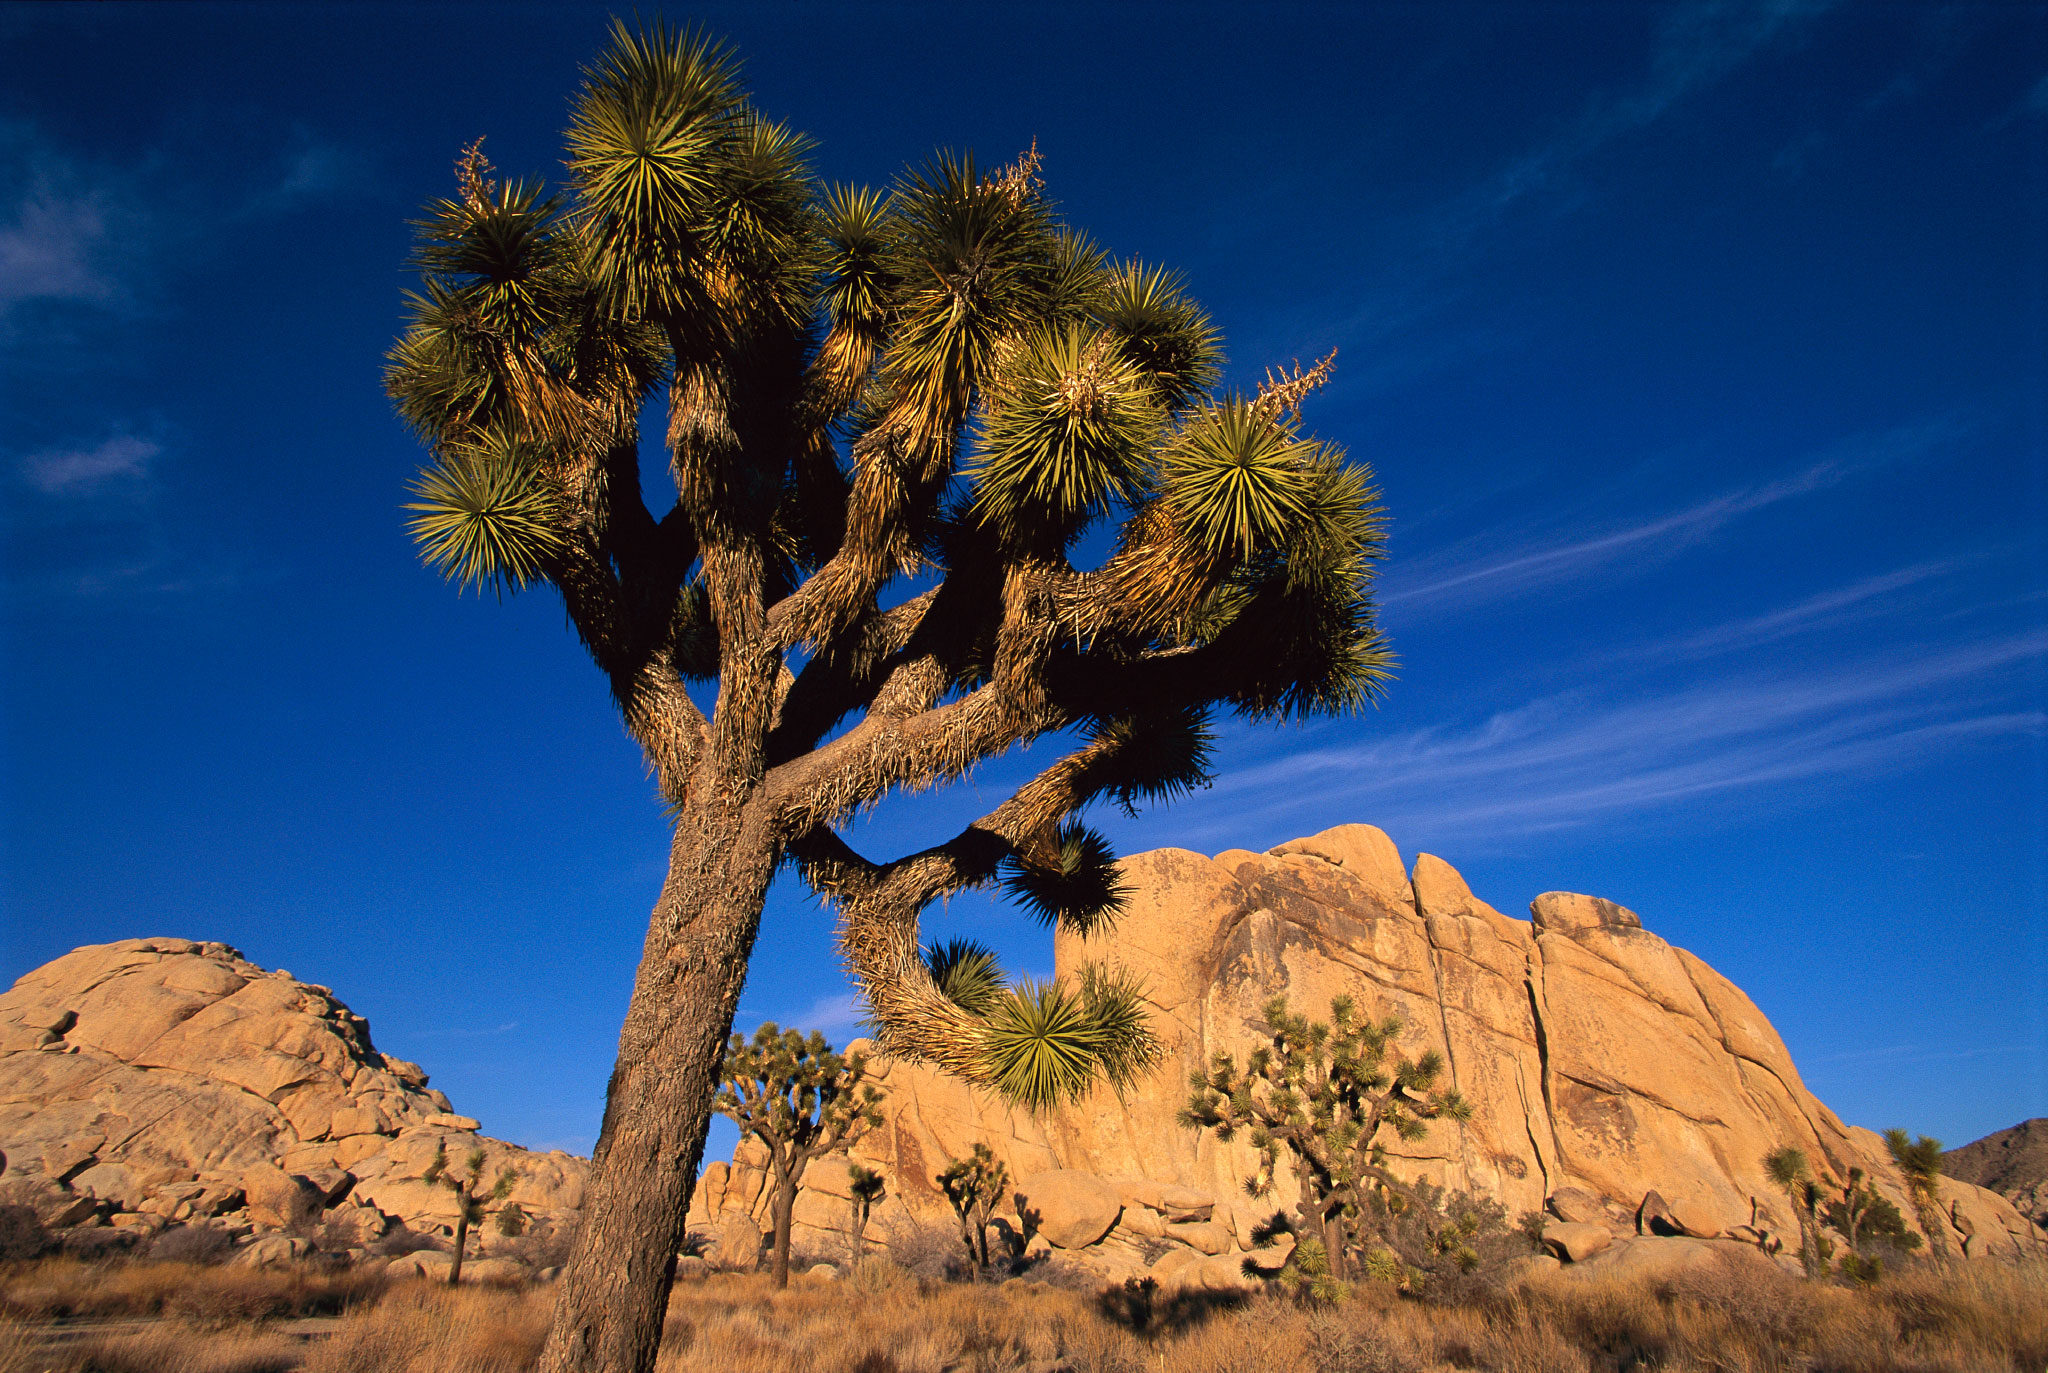 Climate Change Threatens an Iconic Desert Tree